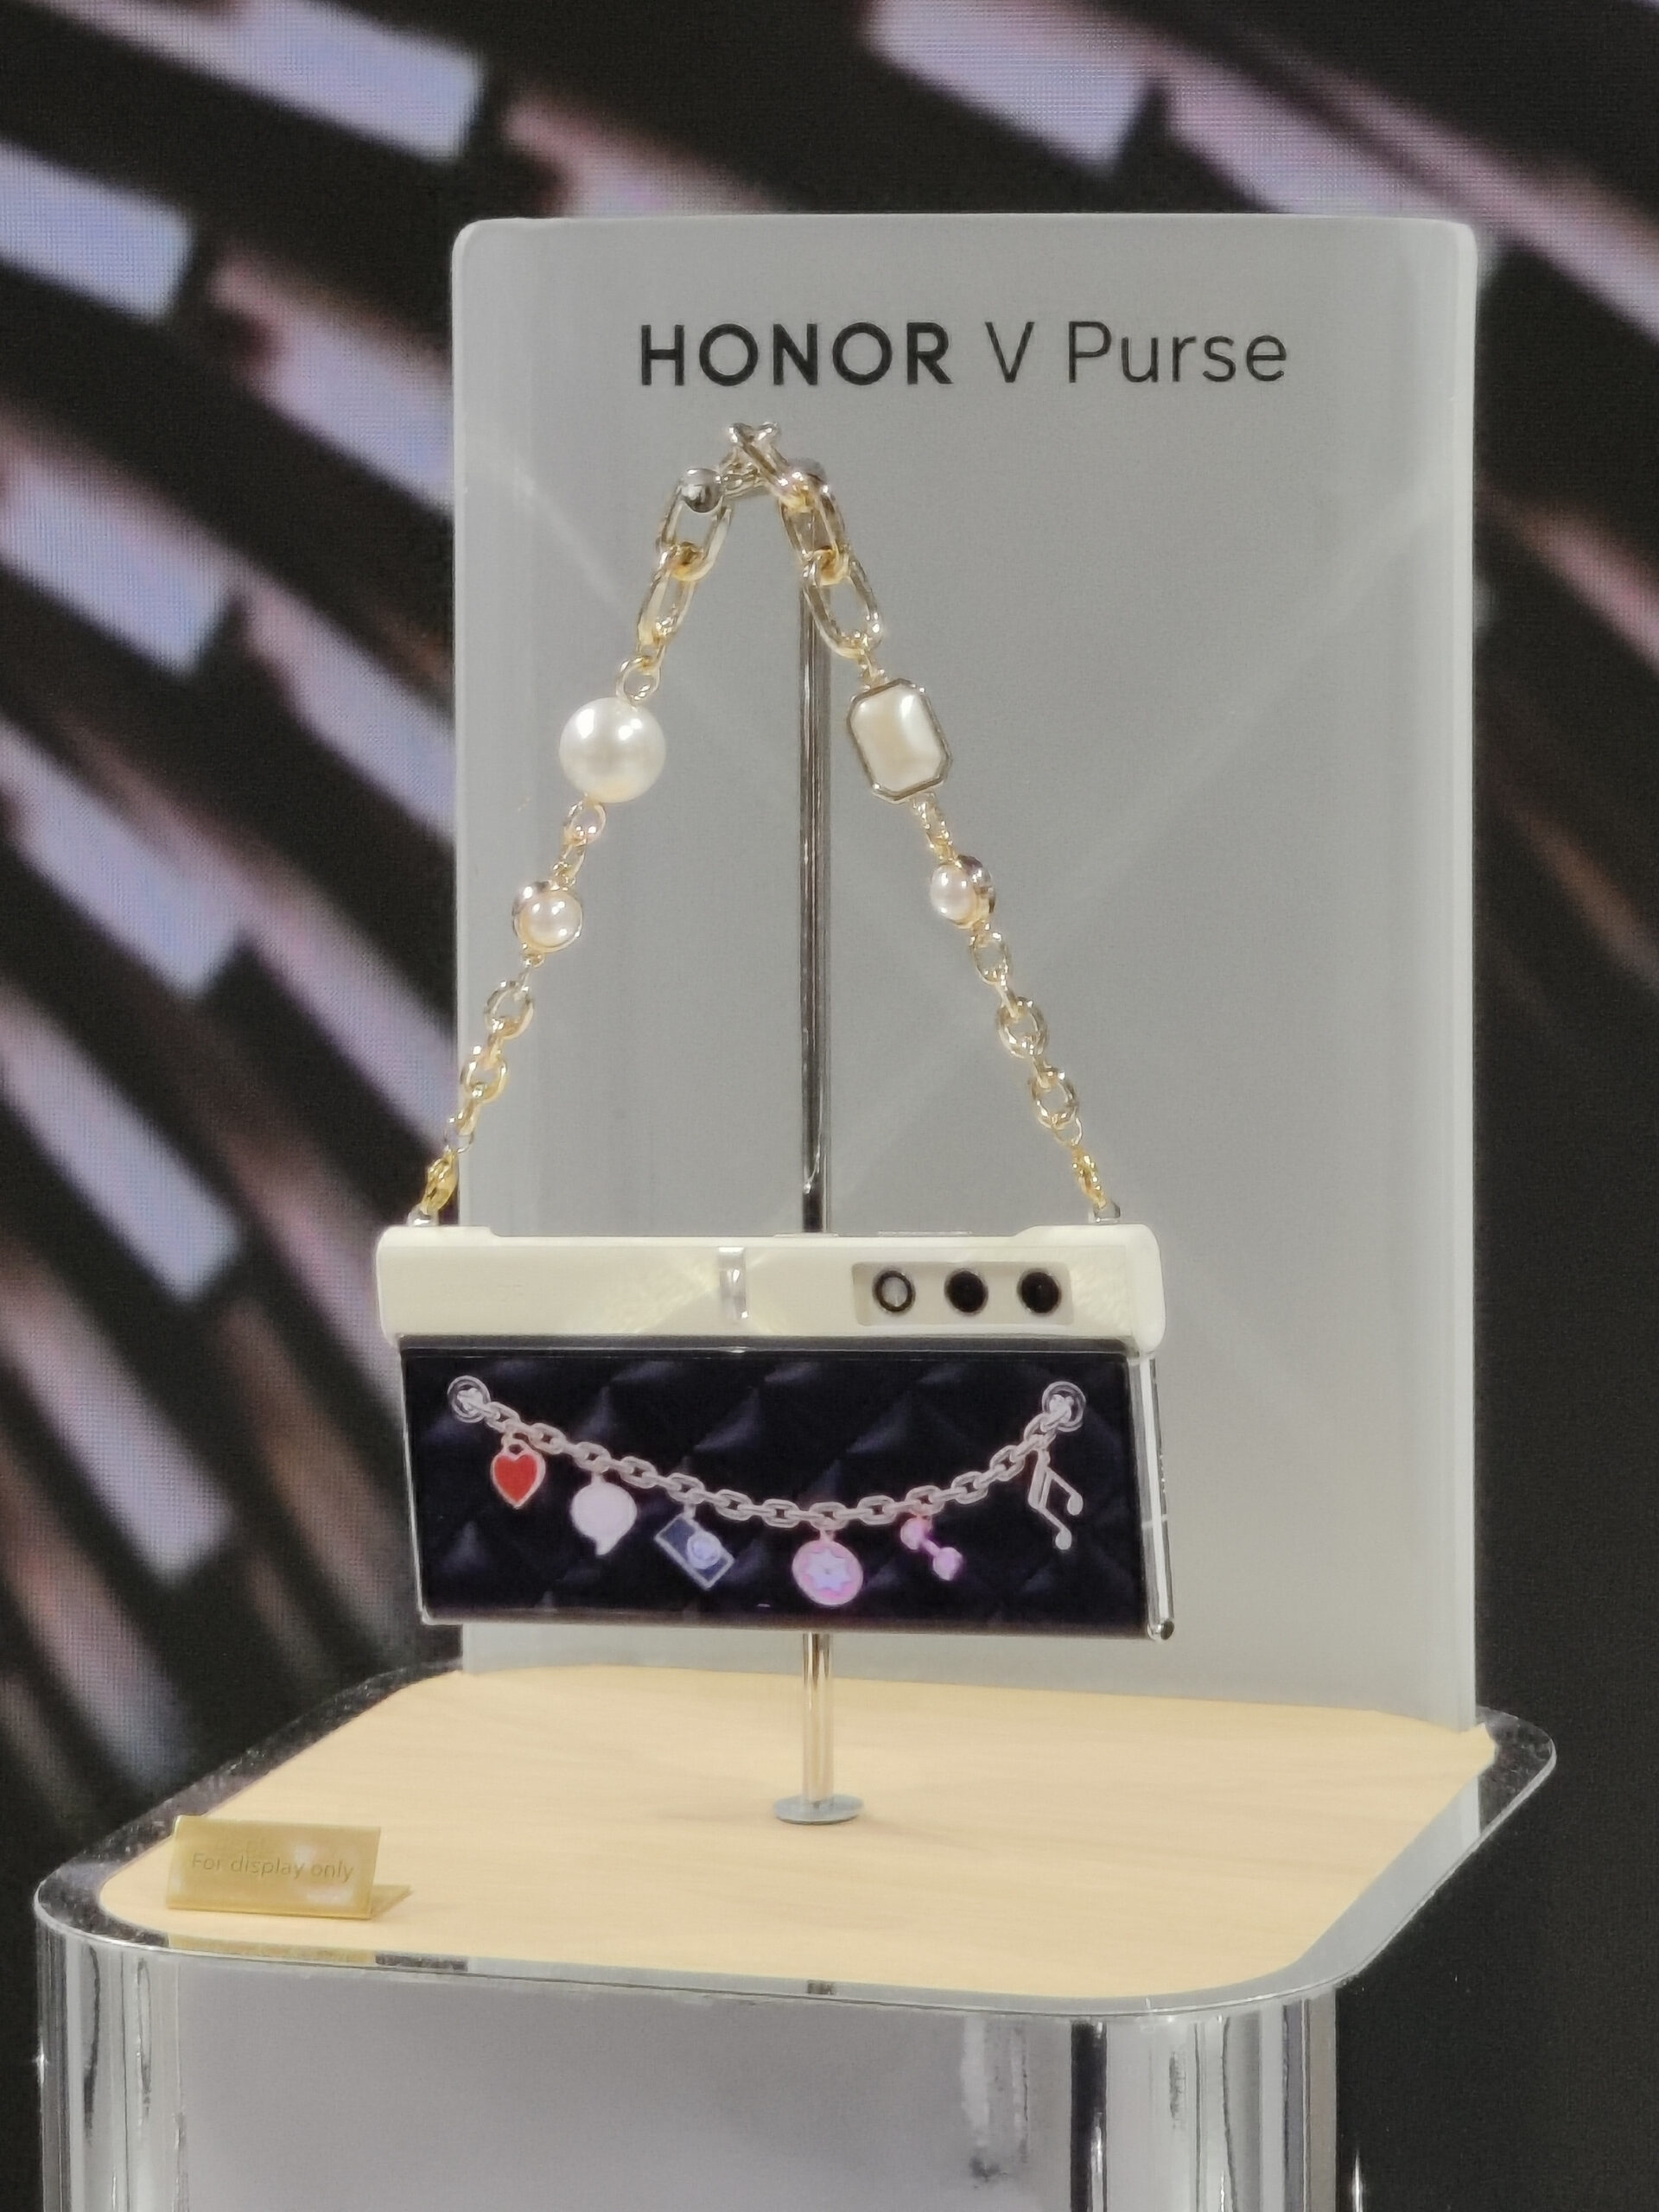 HONOR V Purse Archives - Counterpoint